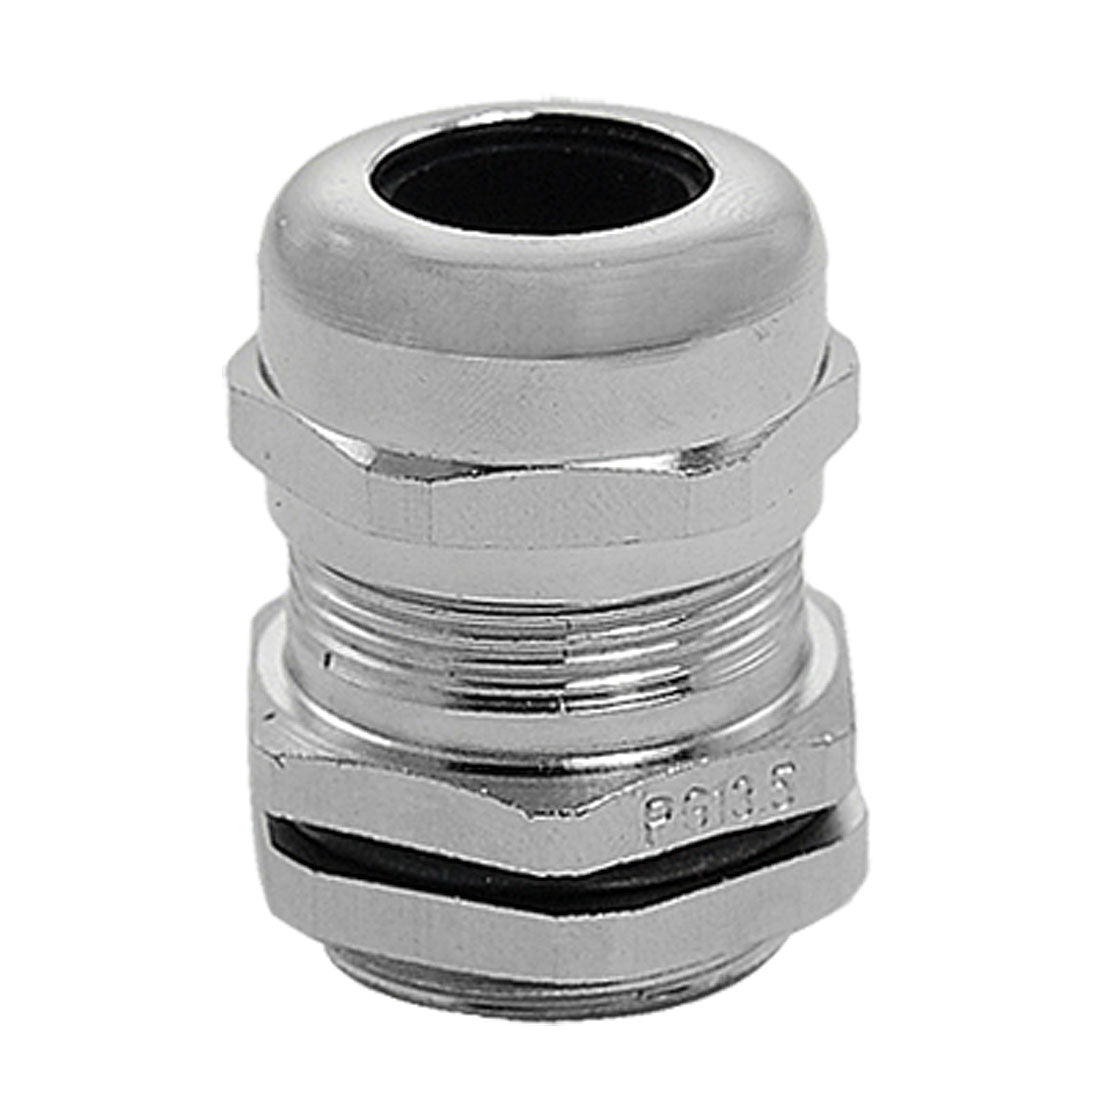 uxcell Uxcell PG13.5 Waterproof Stainless Steel 6-11mm Dia Cables Gland Connector